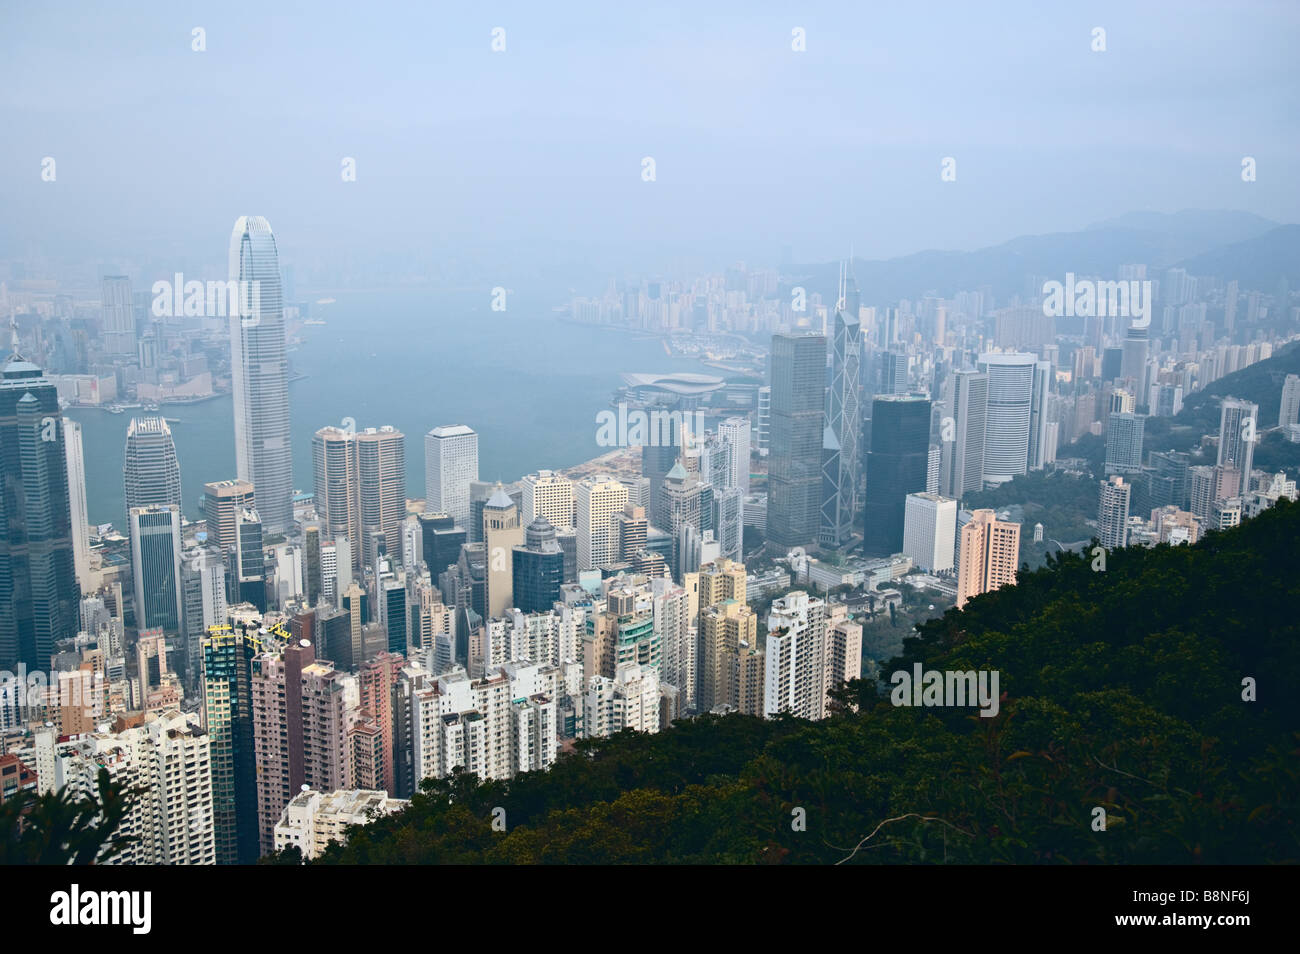 Office towers and apartment buildings of Hong Kong from The Peak with Victoria Harbour & Kowloon visible through haze Stock Photo